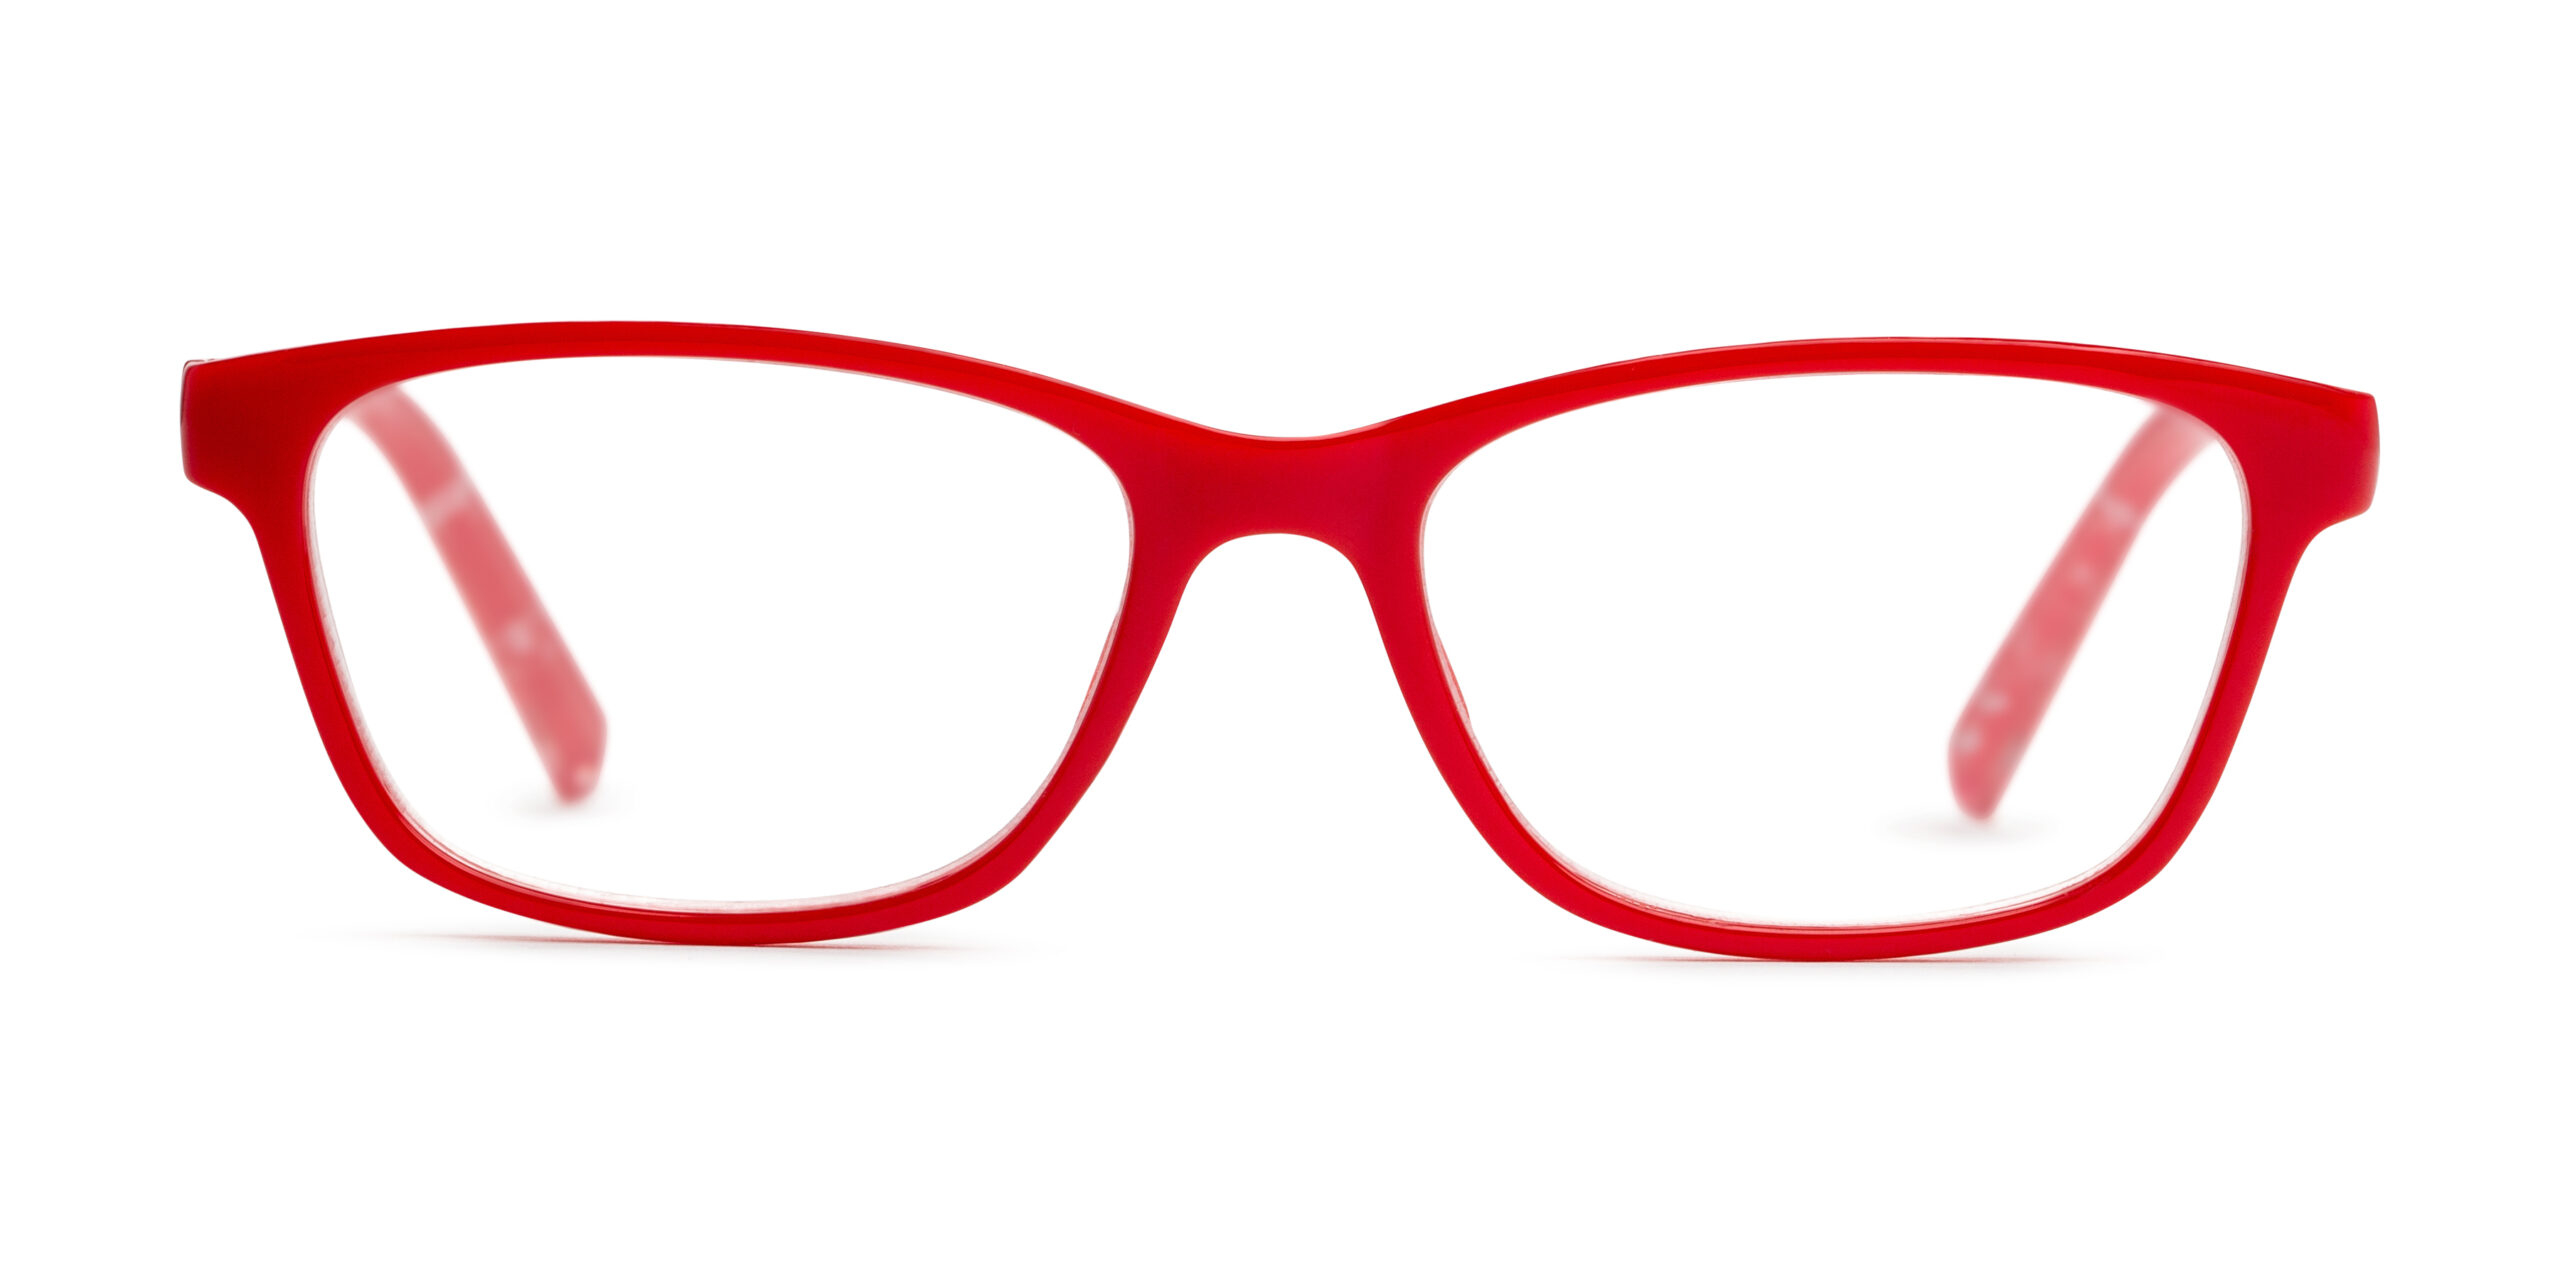 Foster Grant Teams Up with Disney for a whole new collection of reading glasses